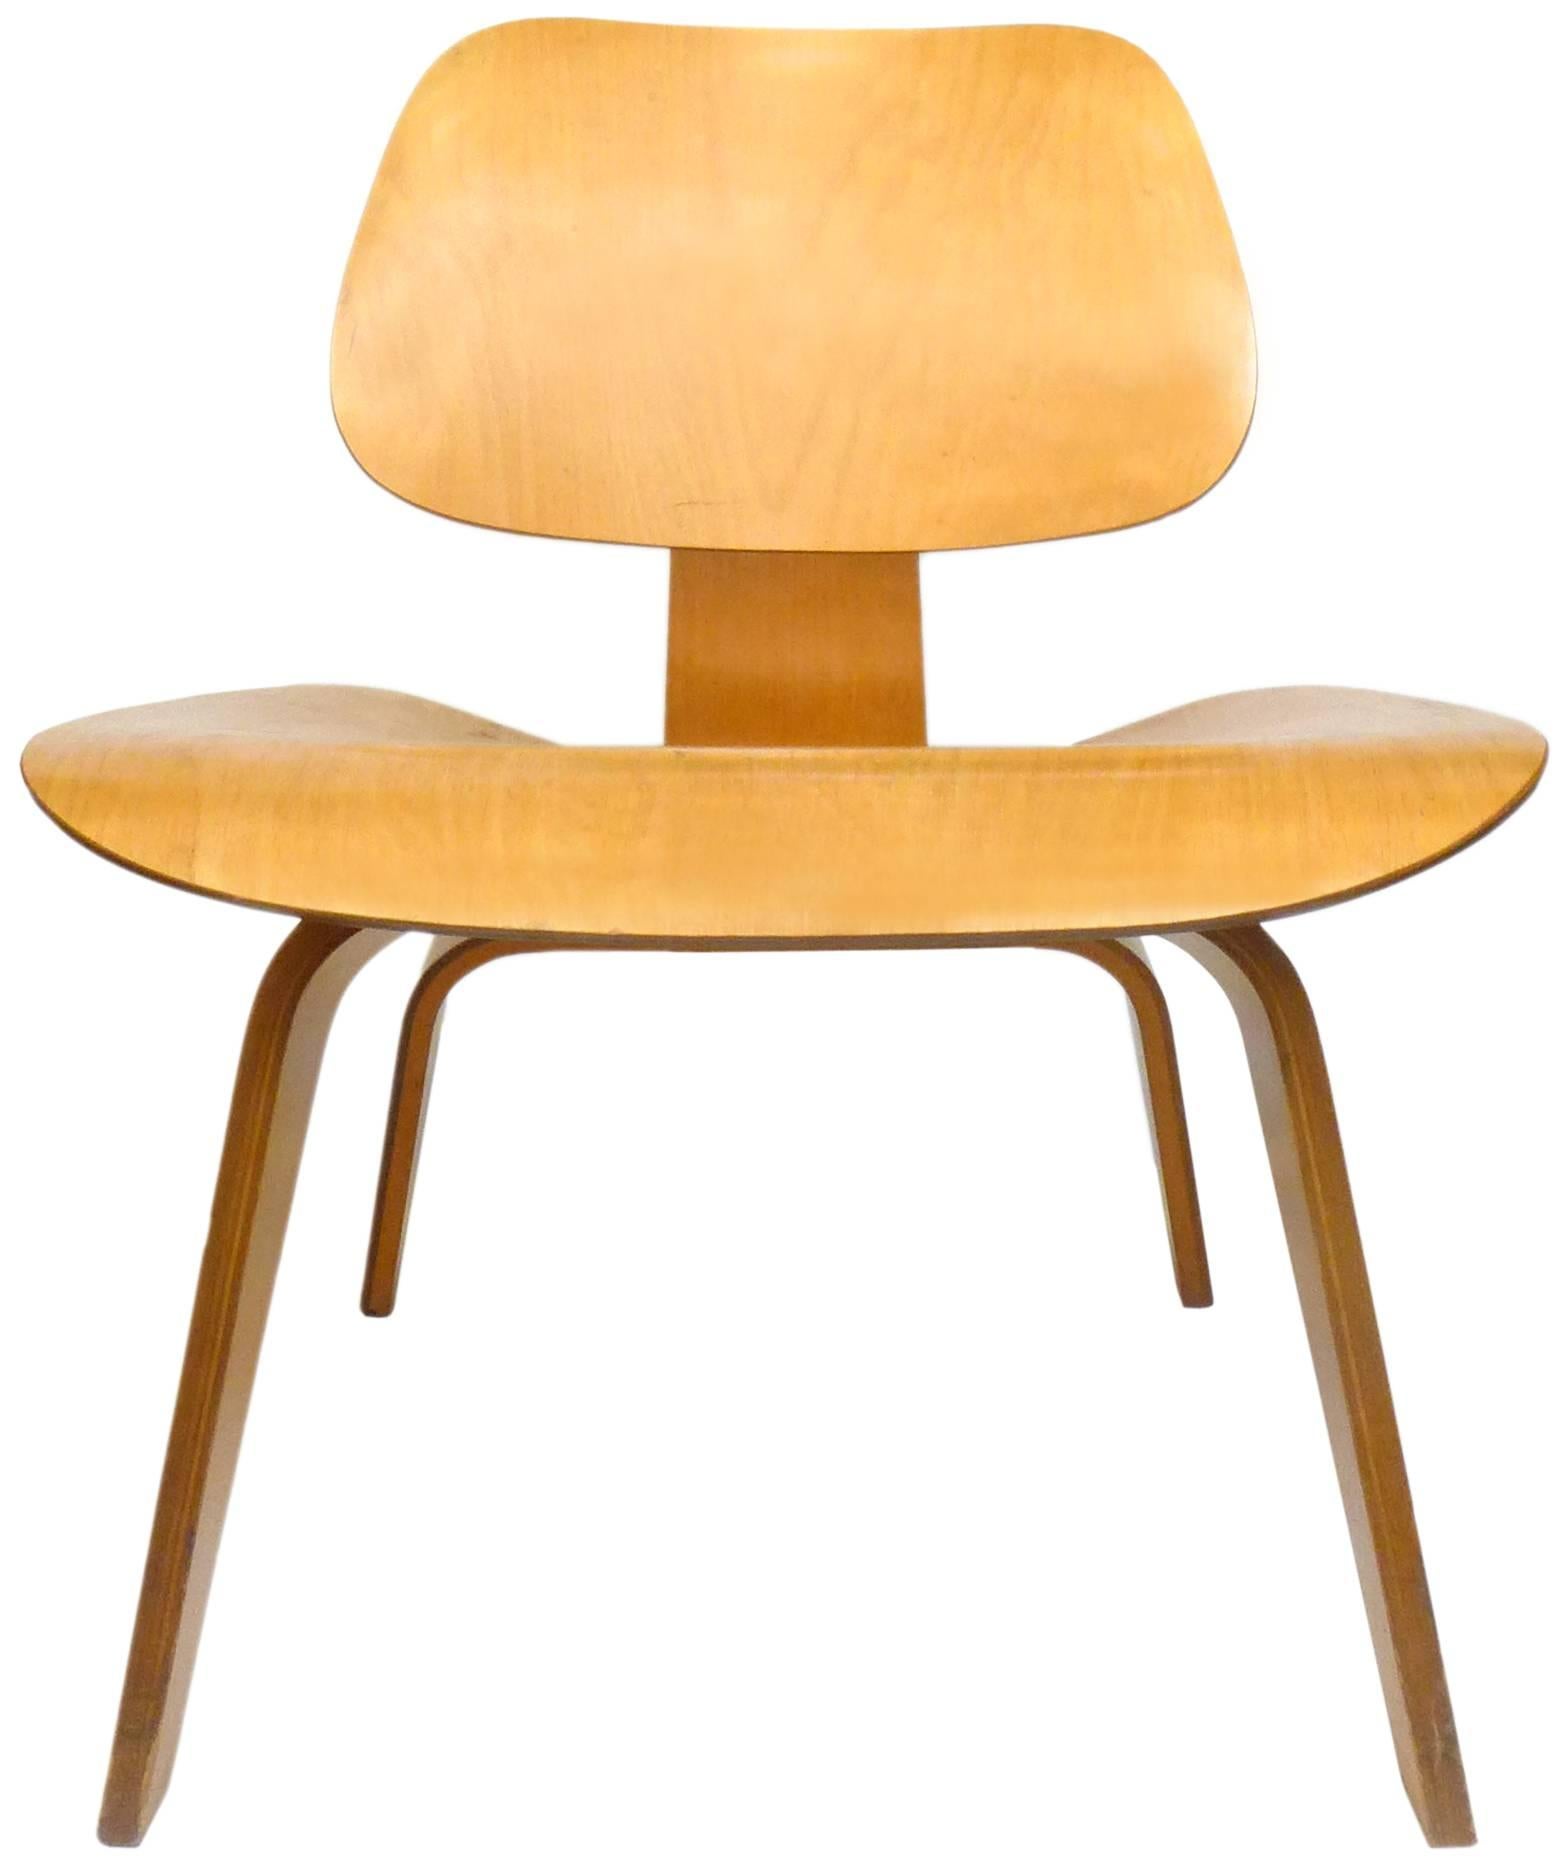 A wonderful, early, Charles Eames bentwood LCW (Lounge Chair Wood). Excellent all-original condition with shock-mounts and floor-glides all still solid and intact. Constructed of figured birch plywood with a beautiful, honey patina. An extremely